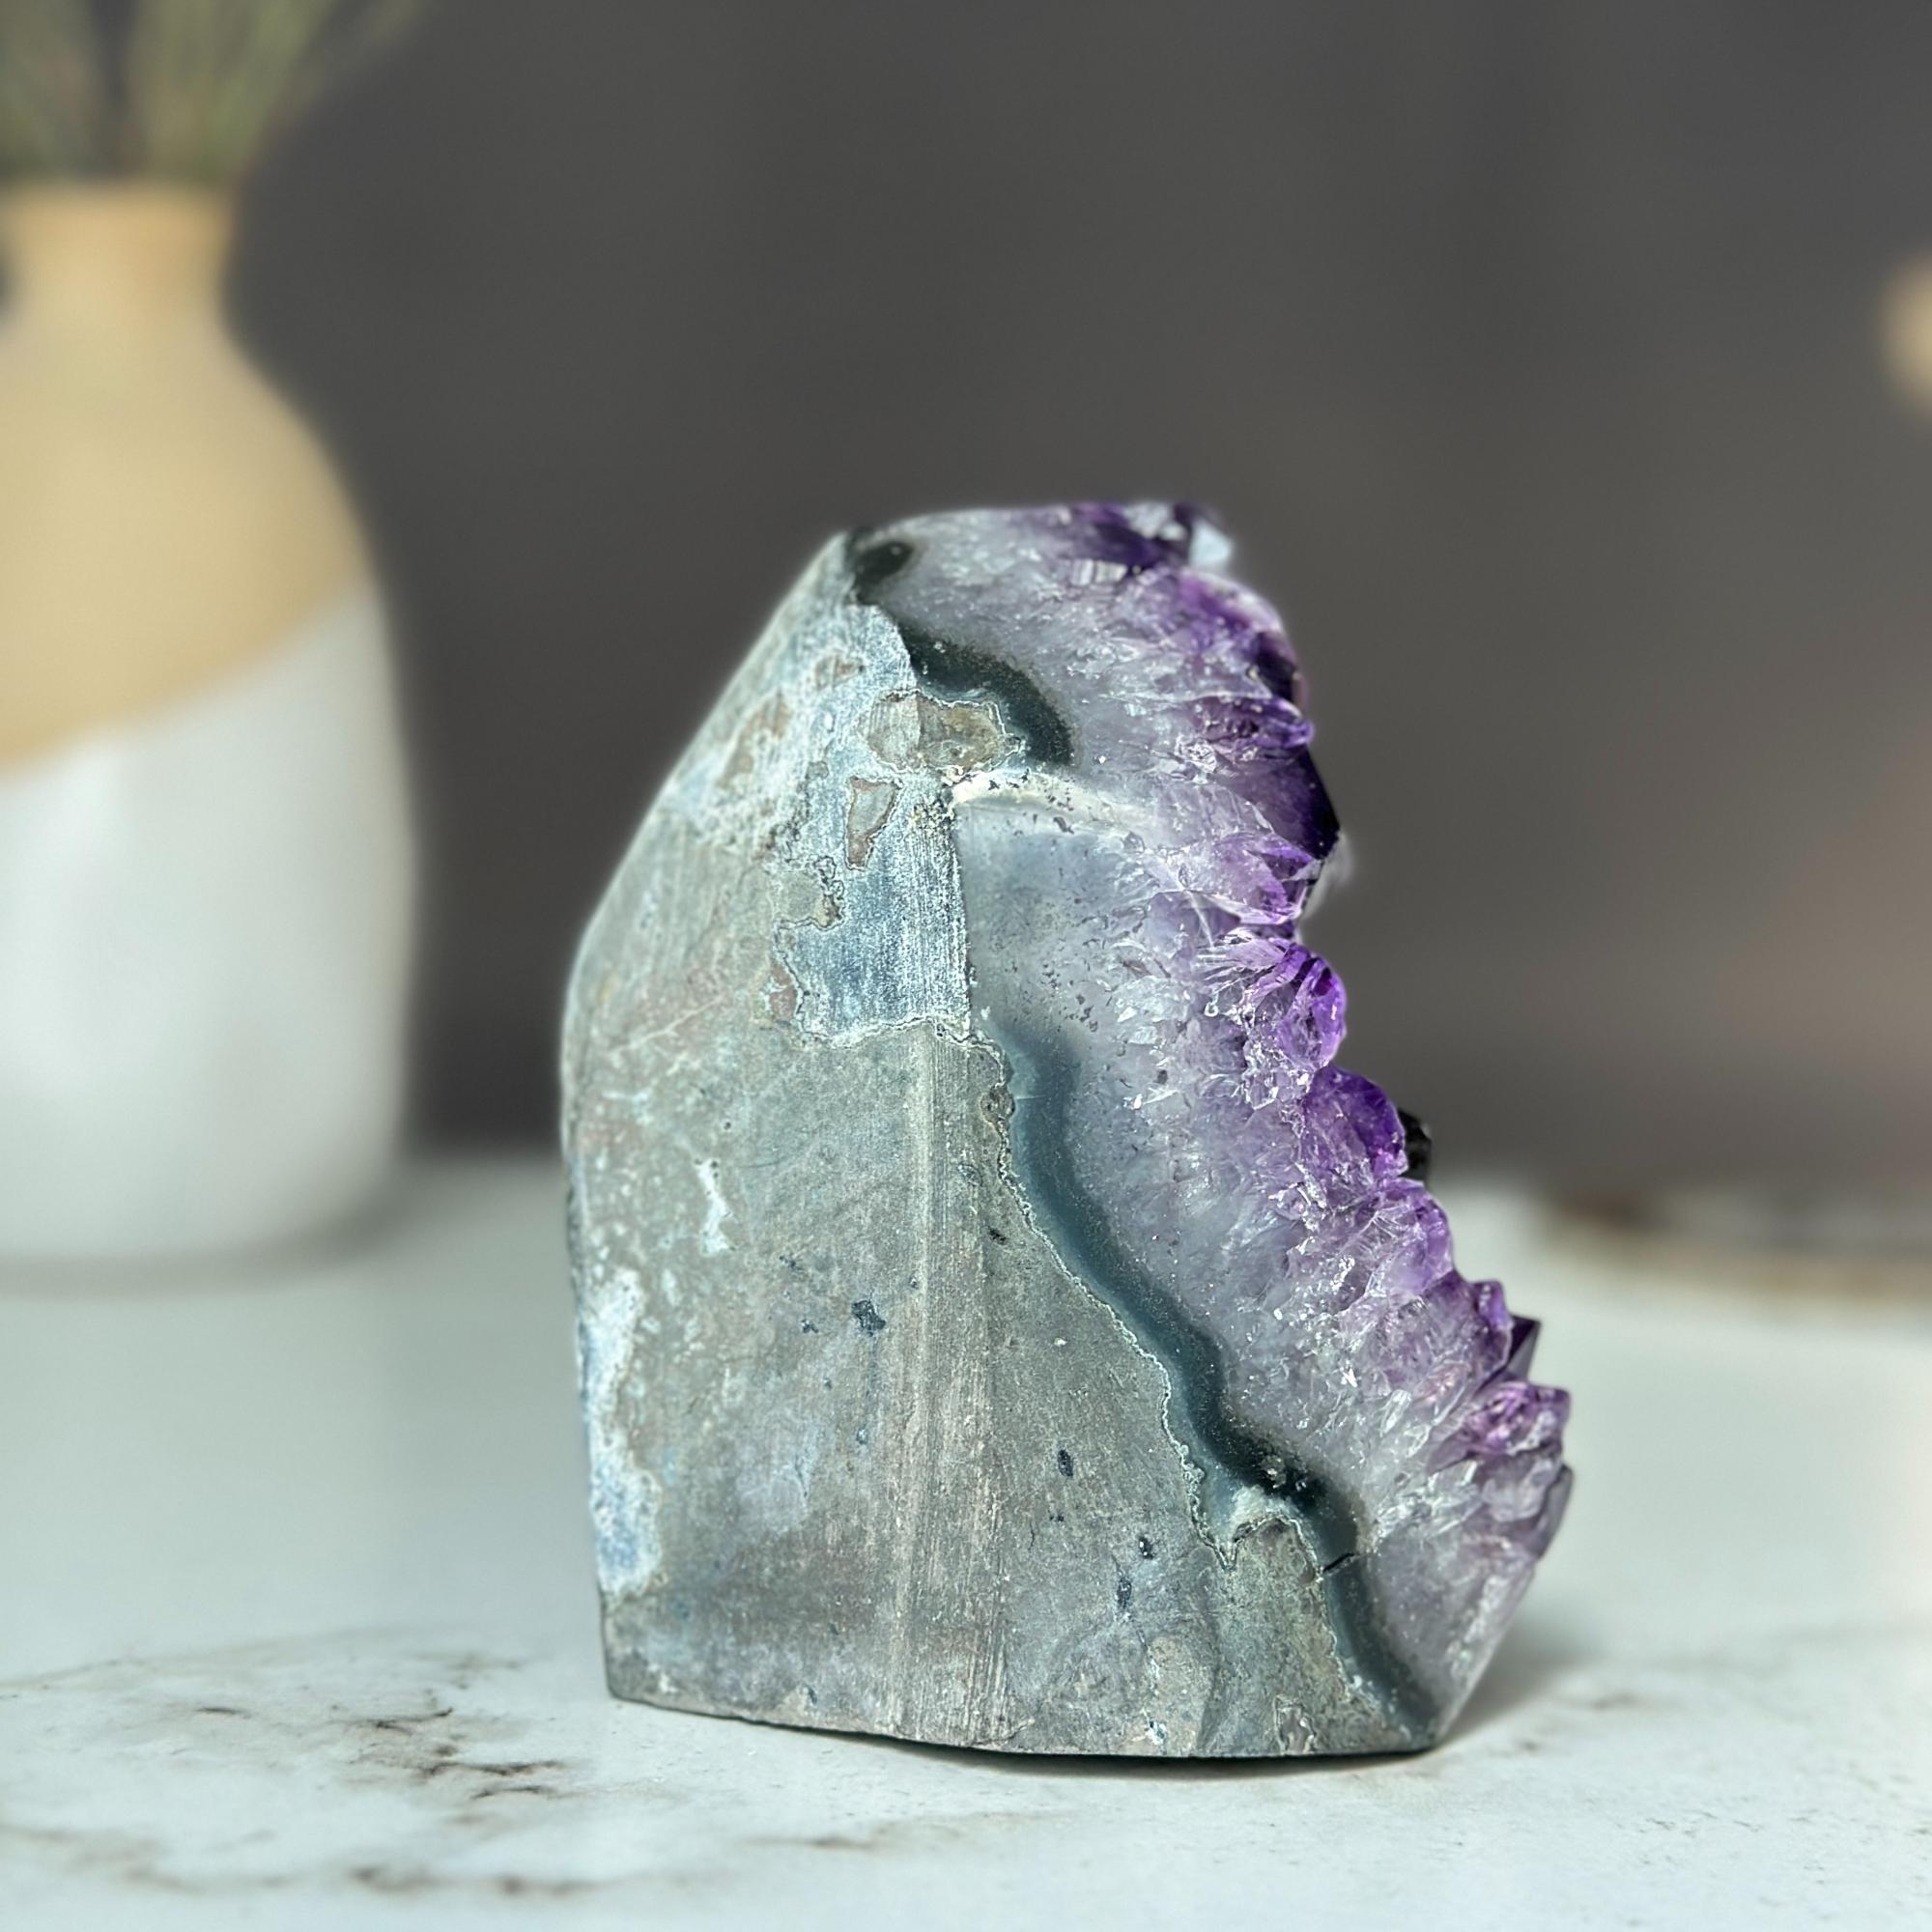 Large amethyst geode with FREE GIFT BOX, Mindfulness gift